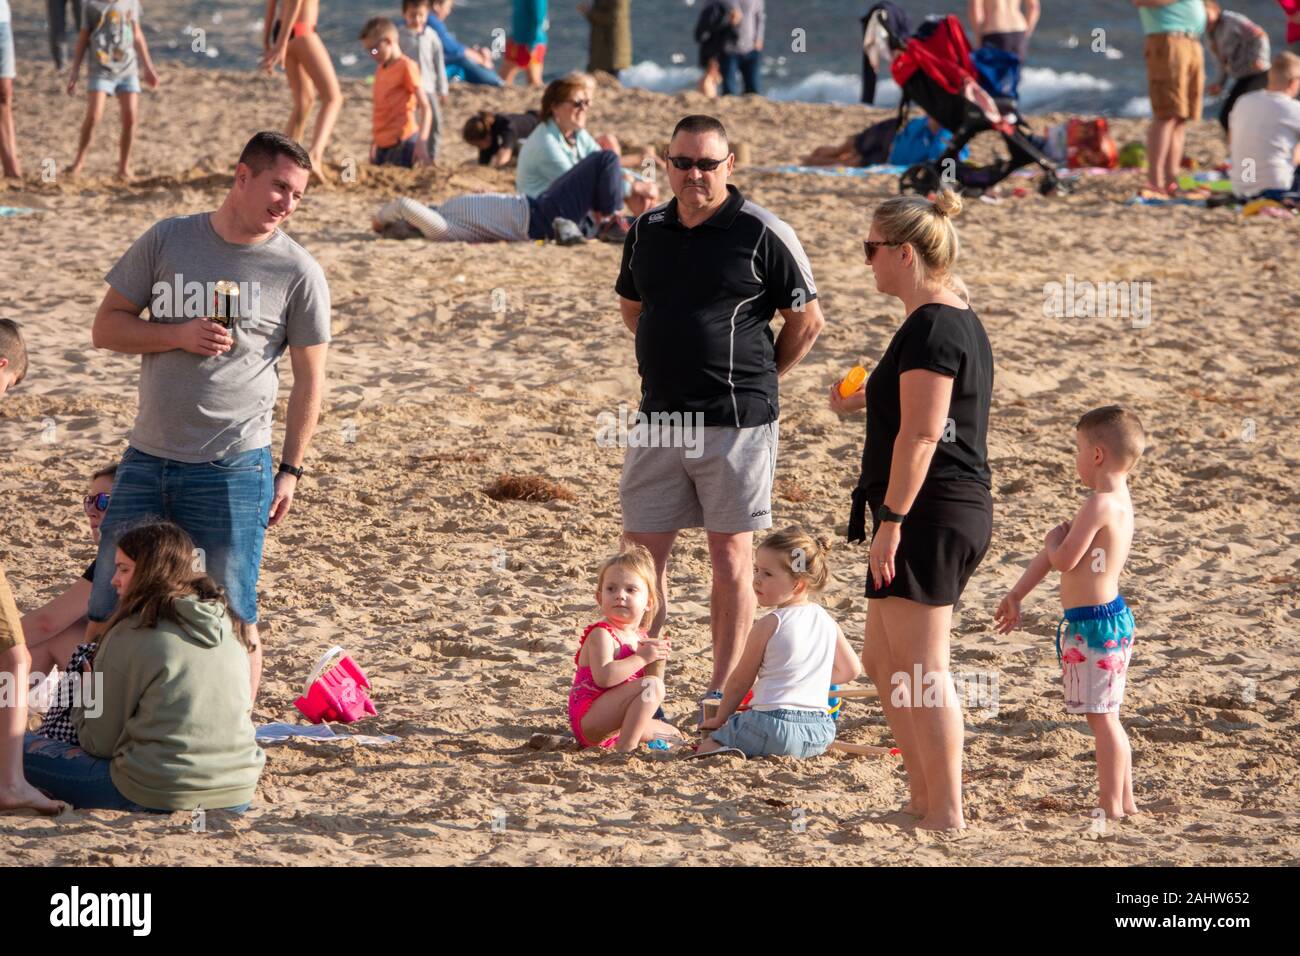 Benidorm, Alicante Province, Spain. 1st January 2020. Tourists and locals enjoy the warm, sunny weather on Levante beach on New Years Day. Family group on the beach. Stock Photo